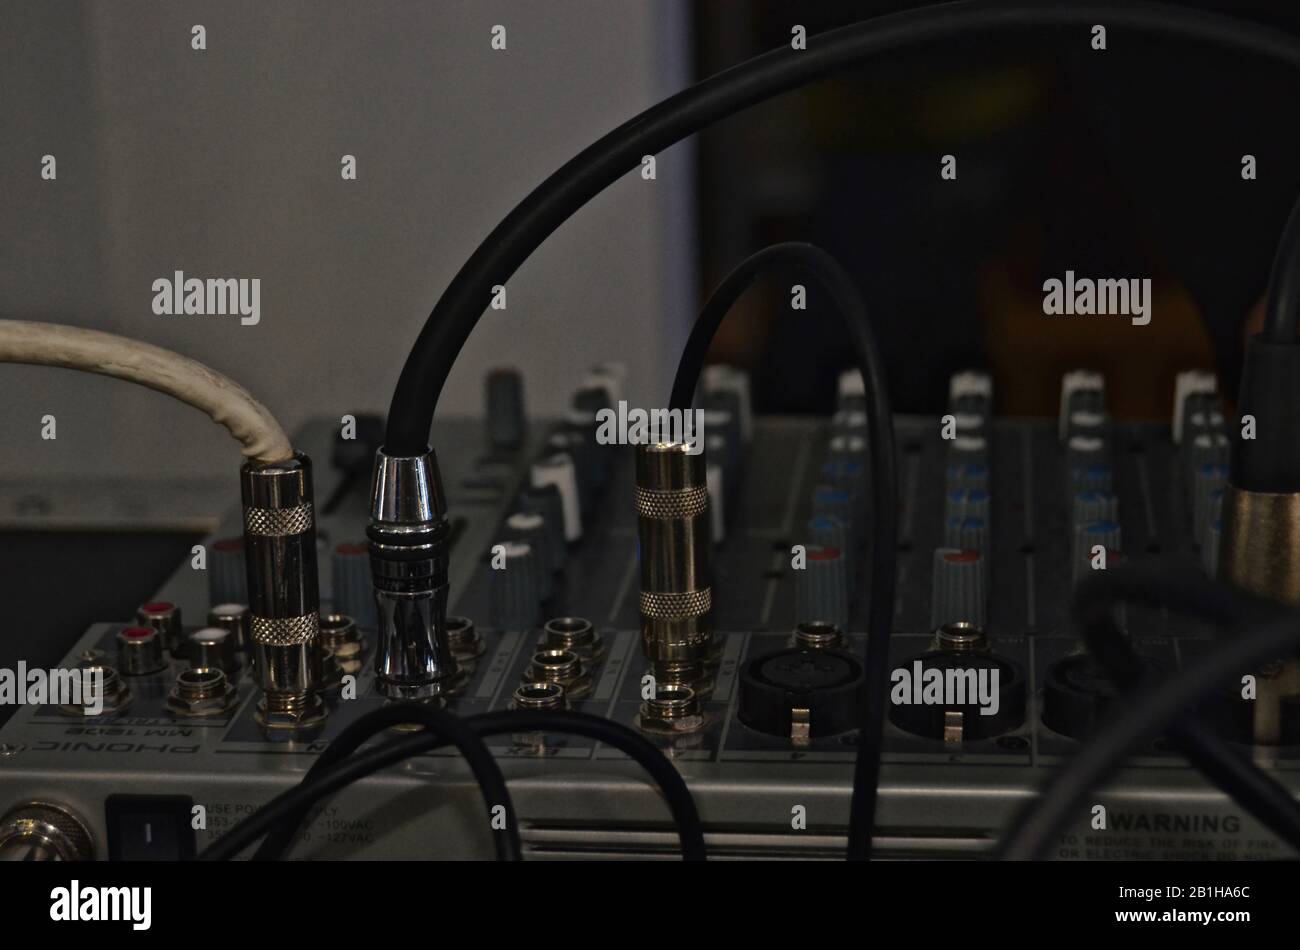 Sounds mixer during a film fest event Stock Photo